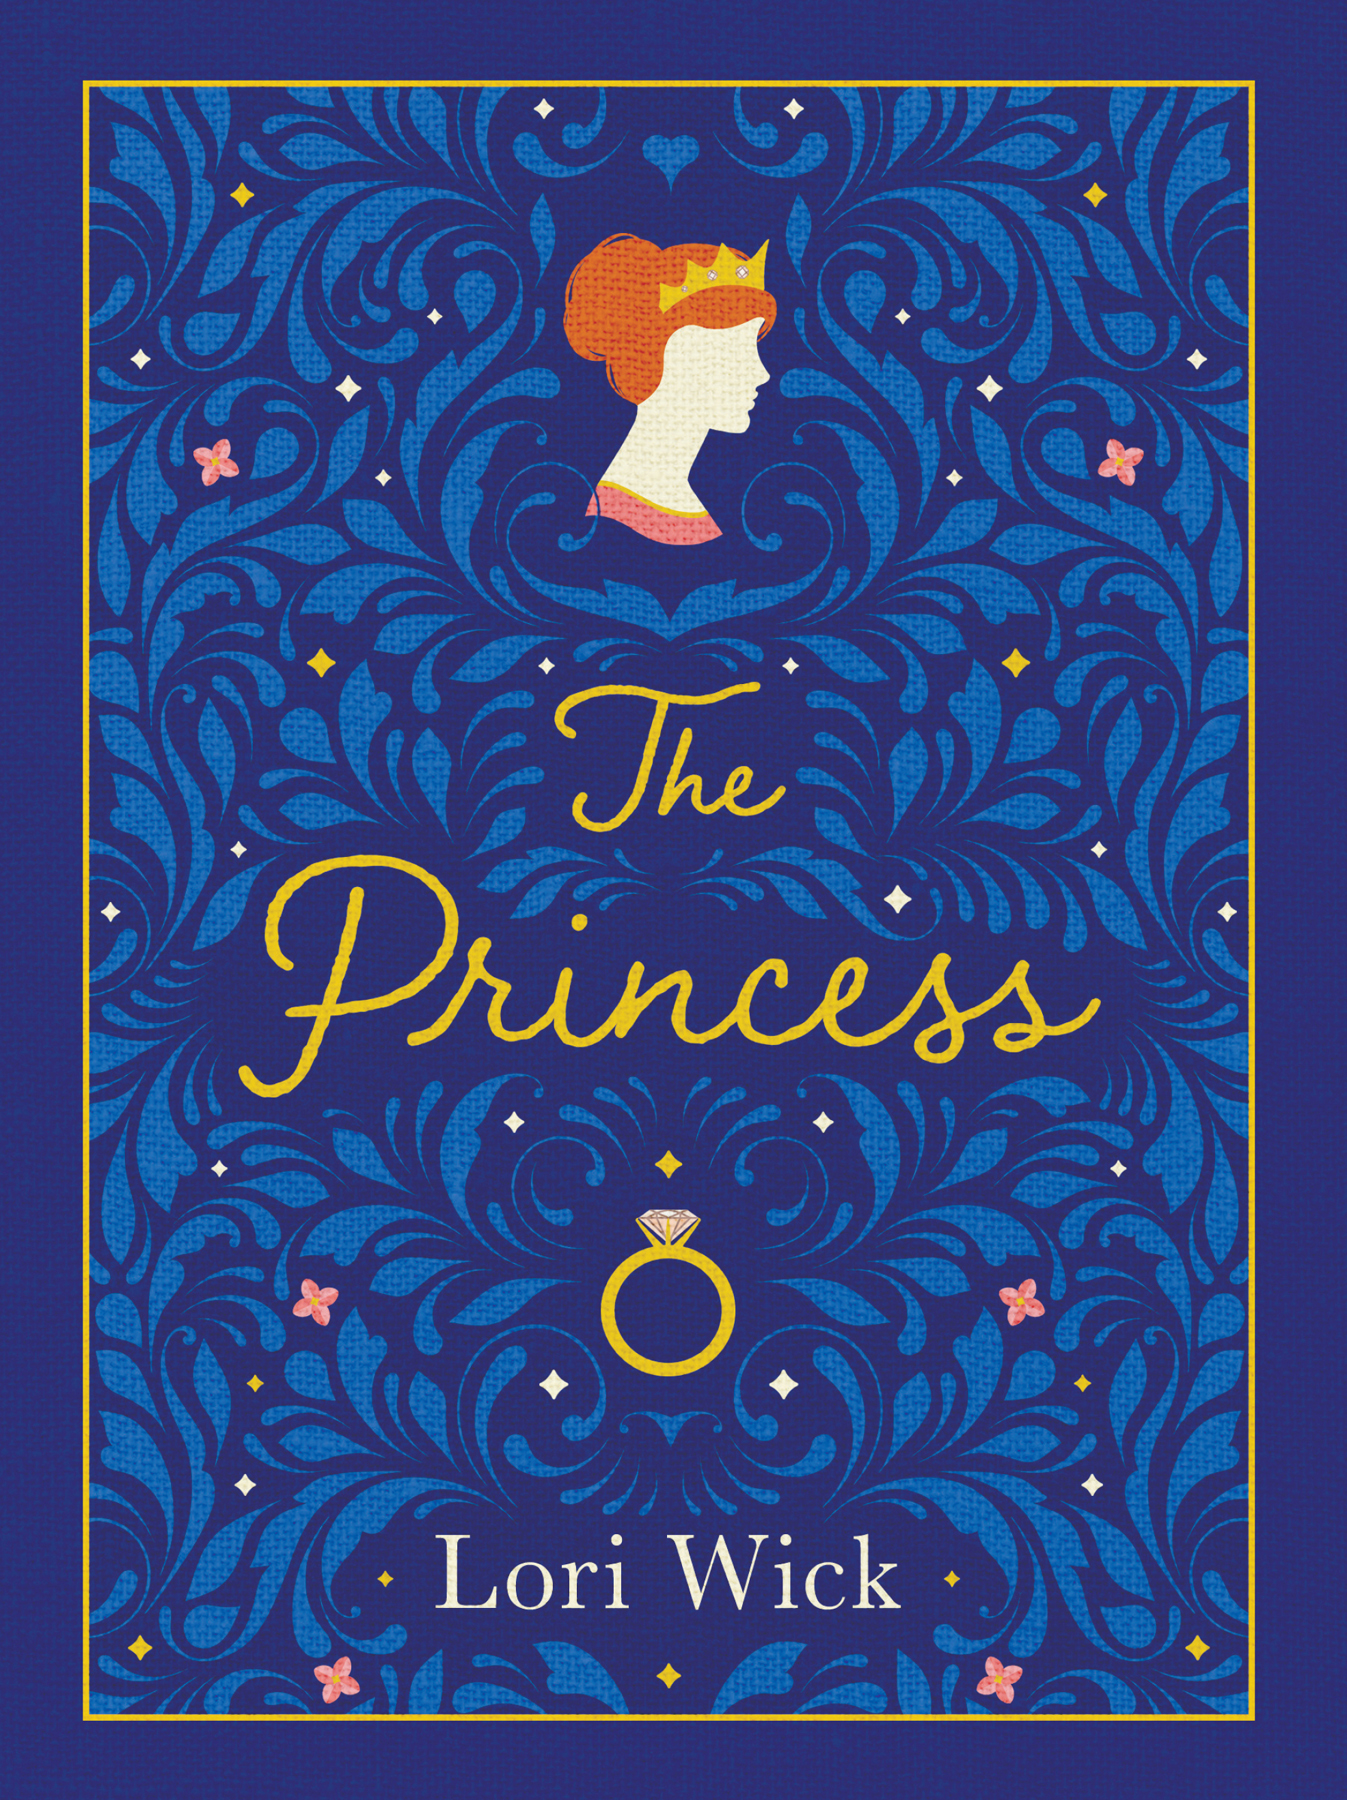 The Princess Special Edition by Lori Wick